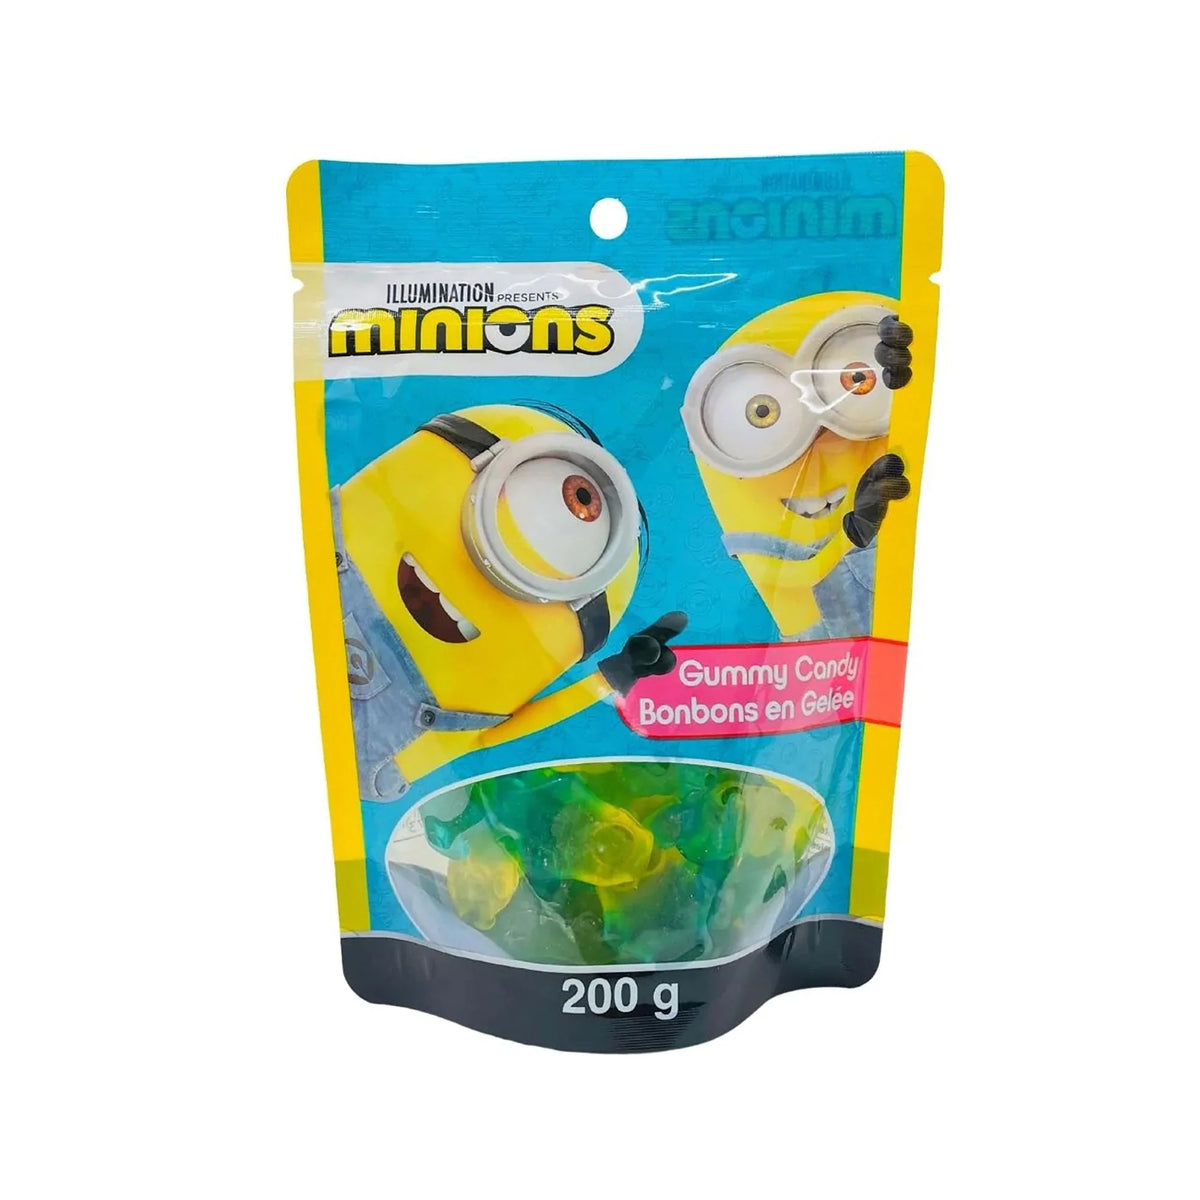 REGAL CONFECTION INC. Candy Minions Gummy Candy, 200 g,  1 Count 067535451738